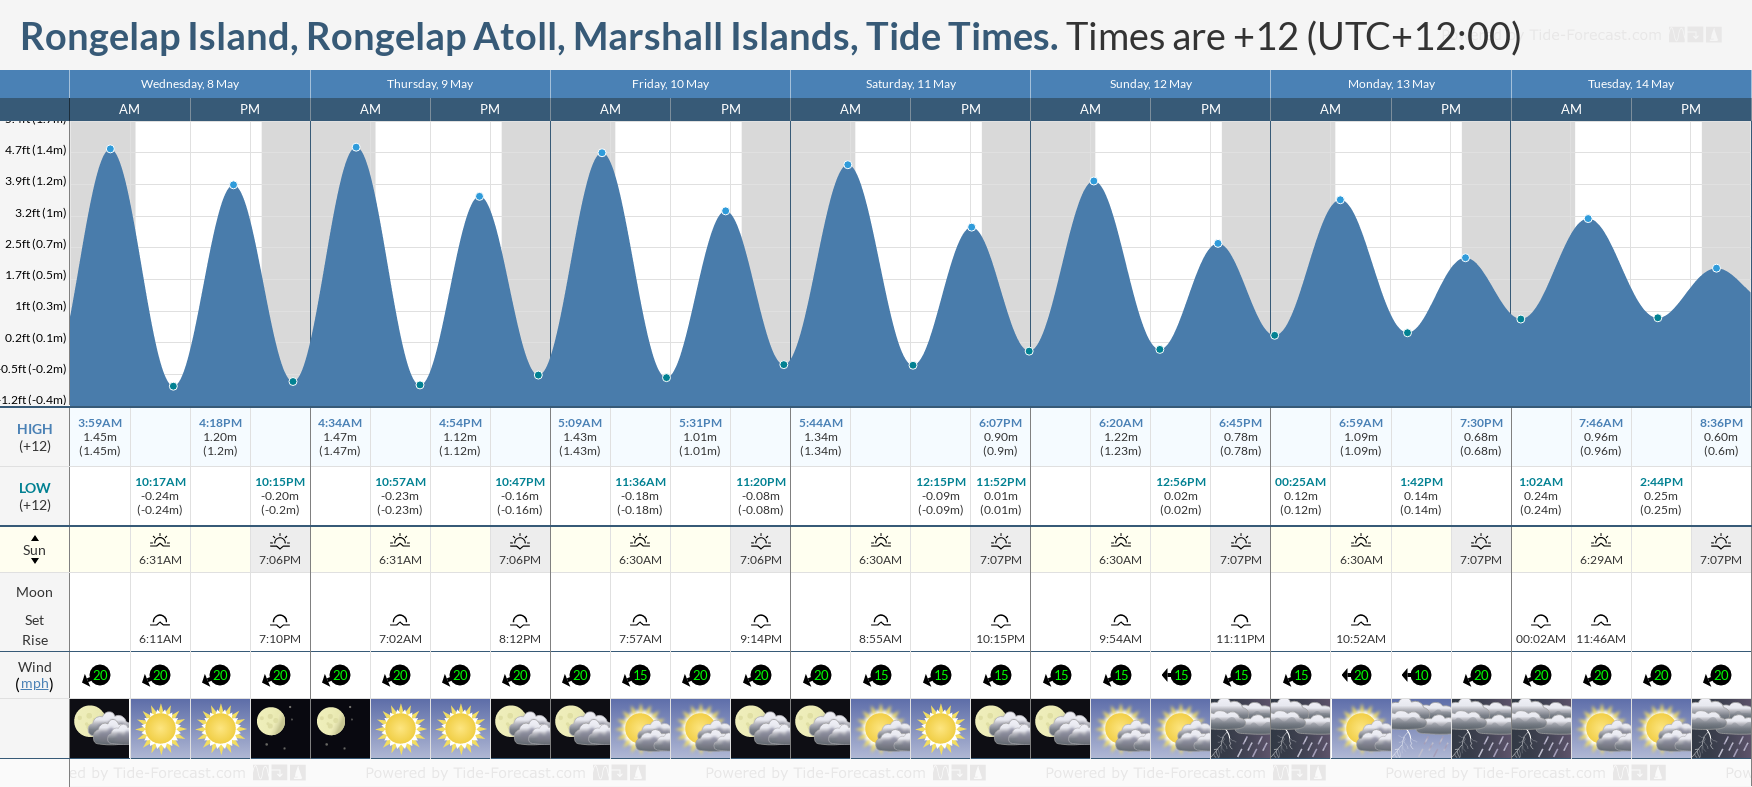 Rongelap Island, Rongelap Atoll, Marshall Islands Tide Chart including high and low tide tide times for the next 7 days